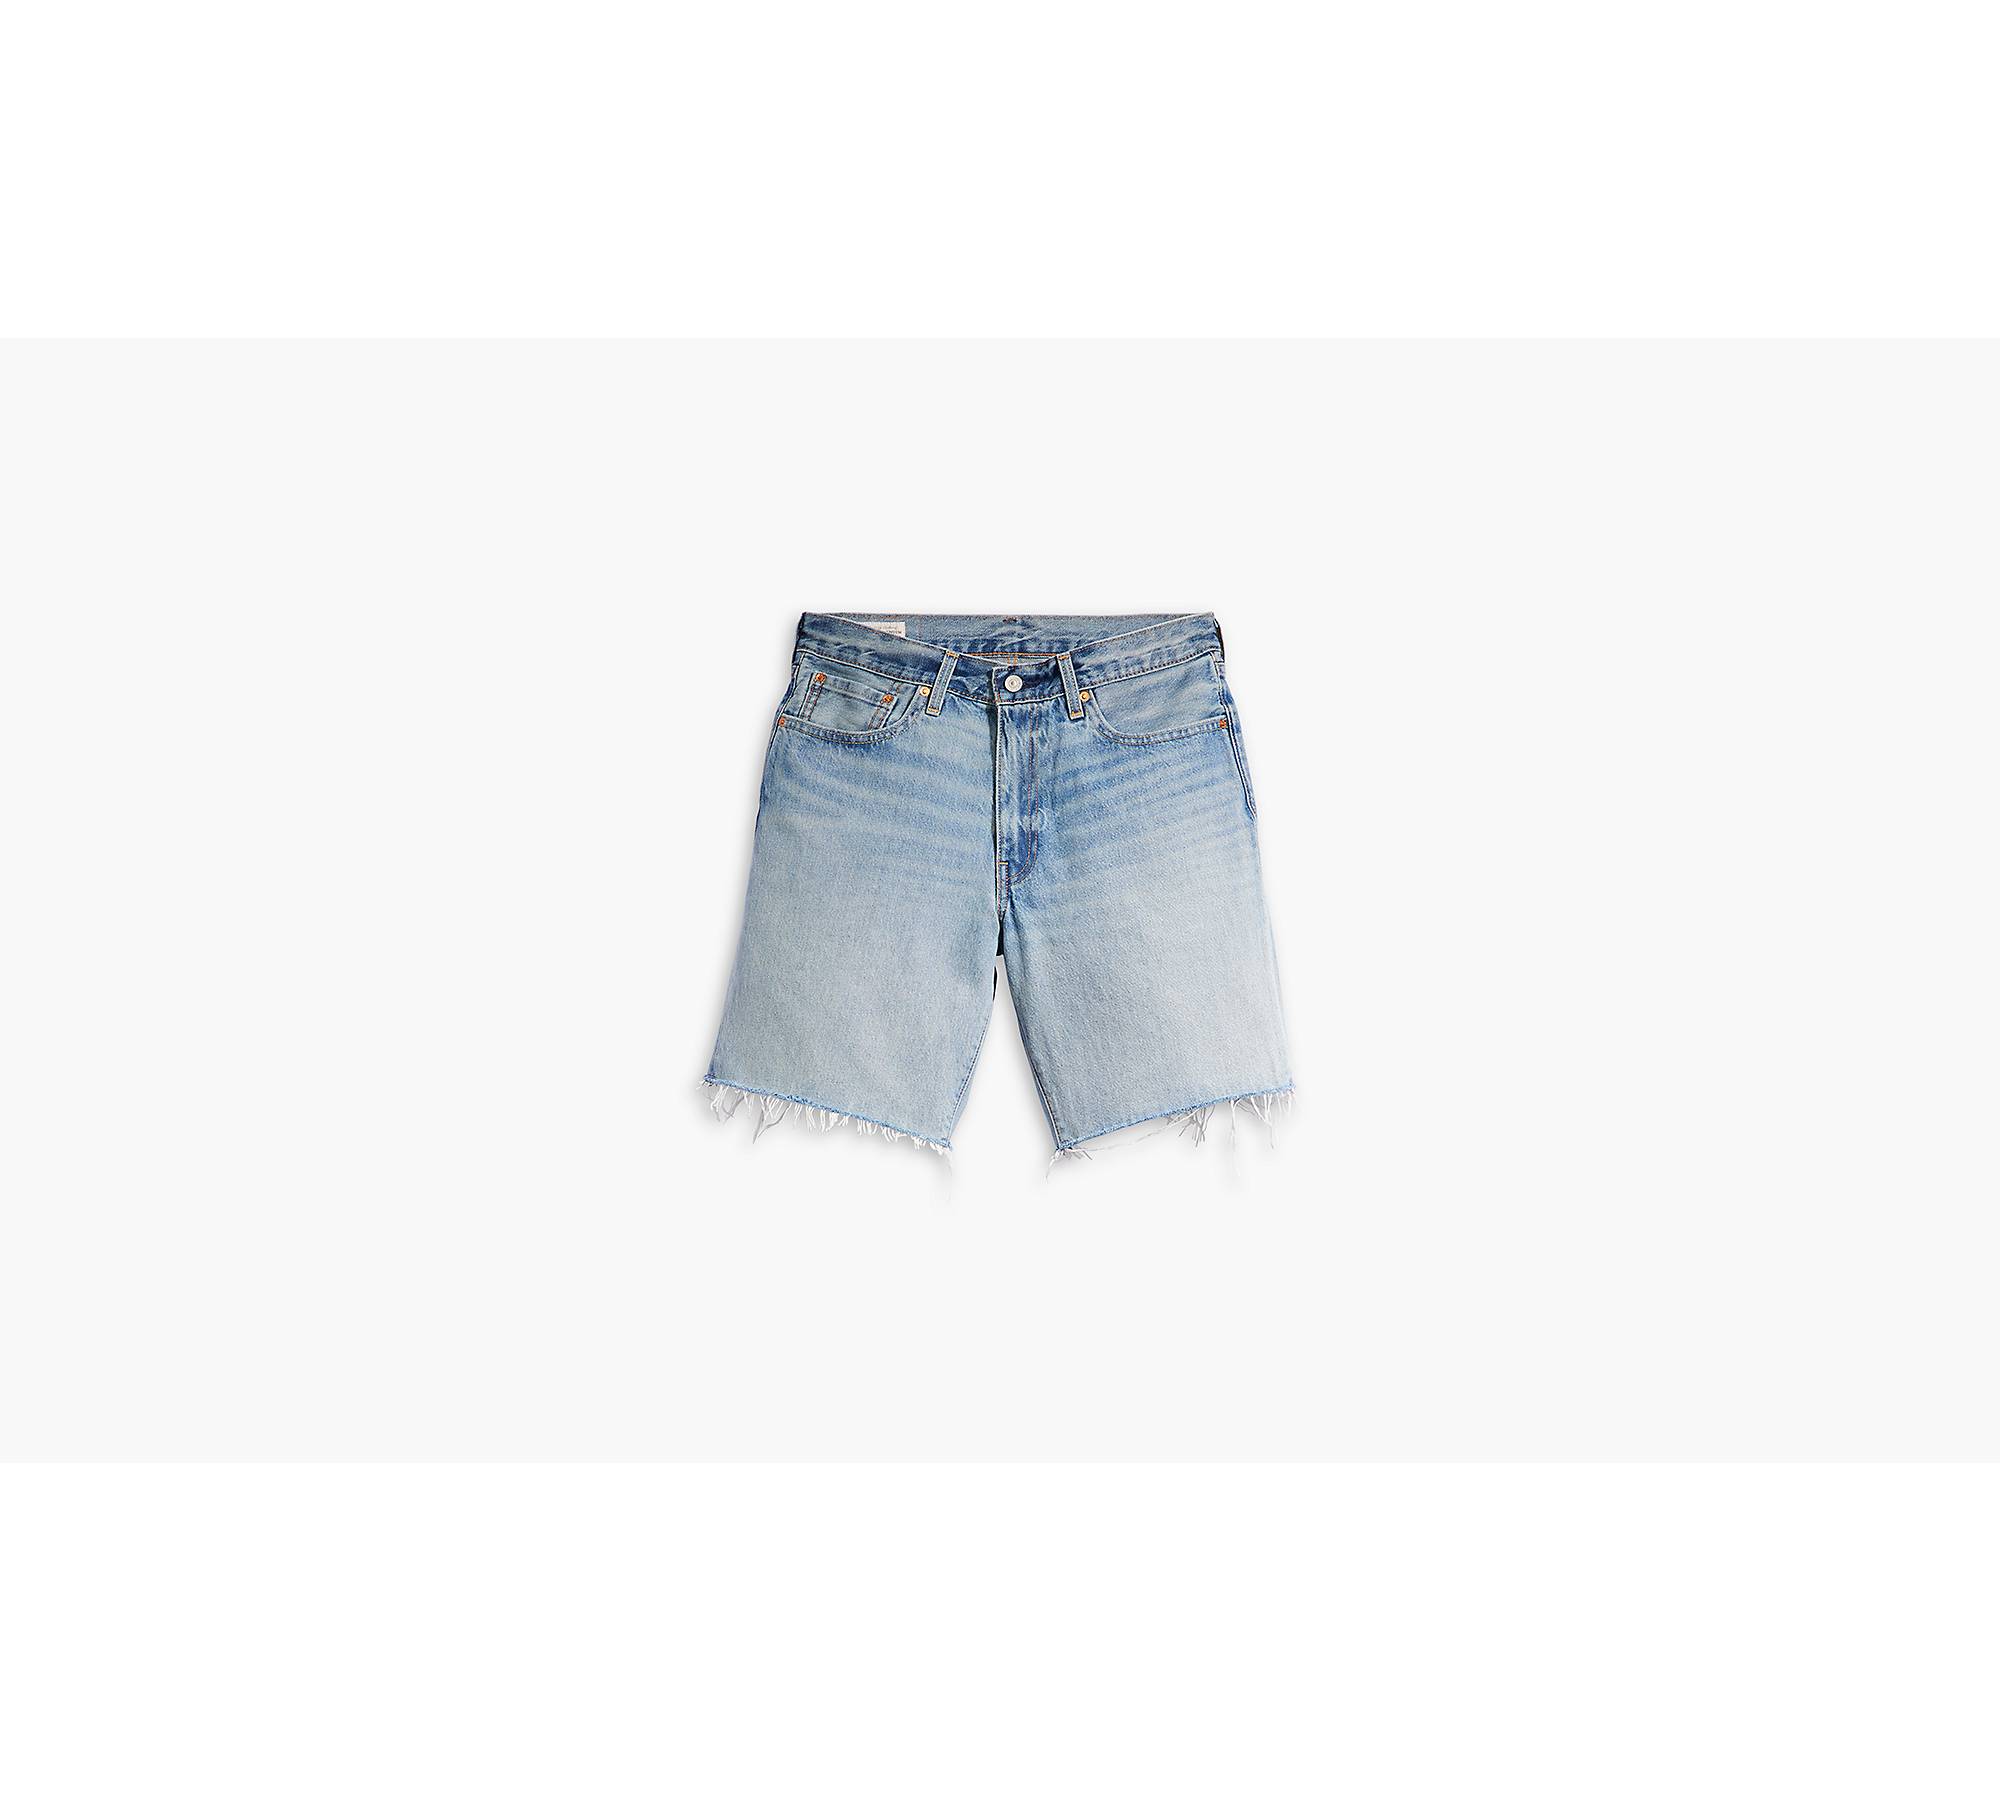 468™ Stay Loose Shorts - Blue | Levi's® GB